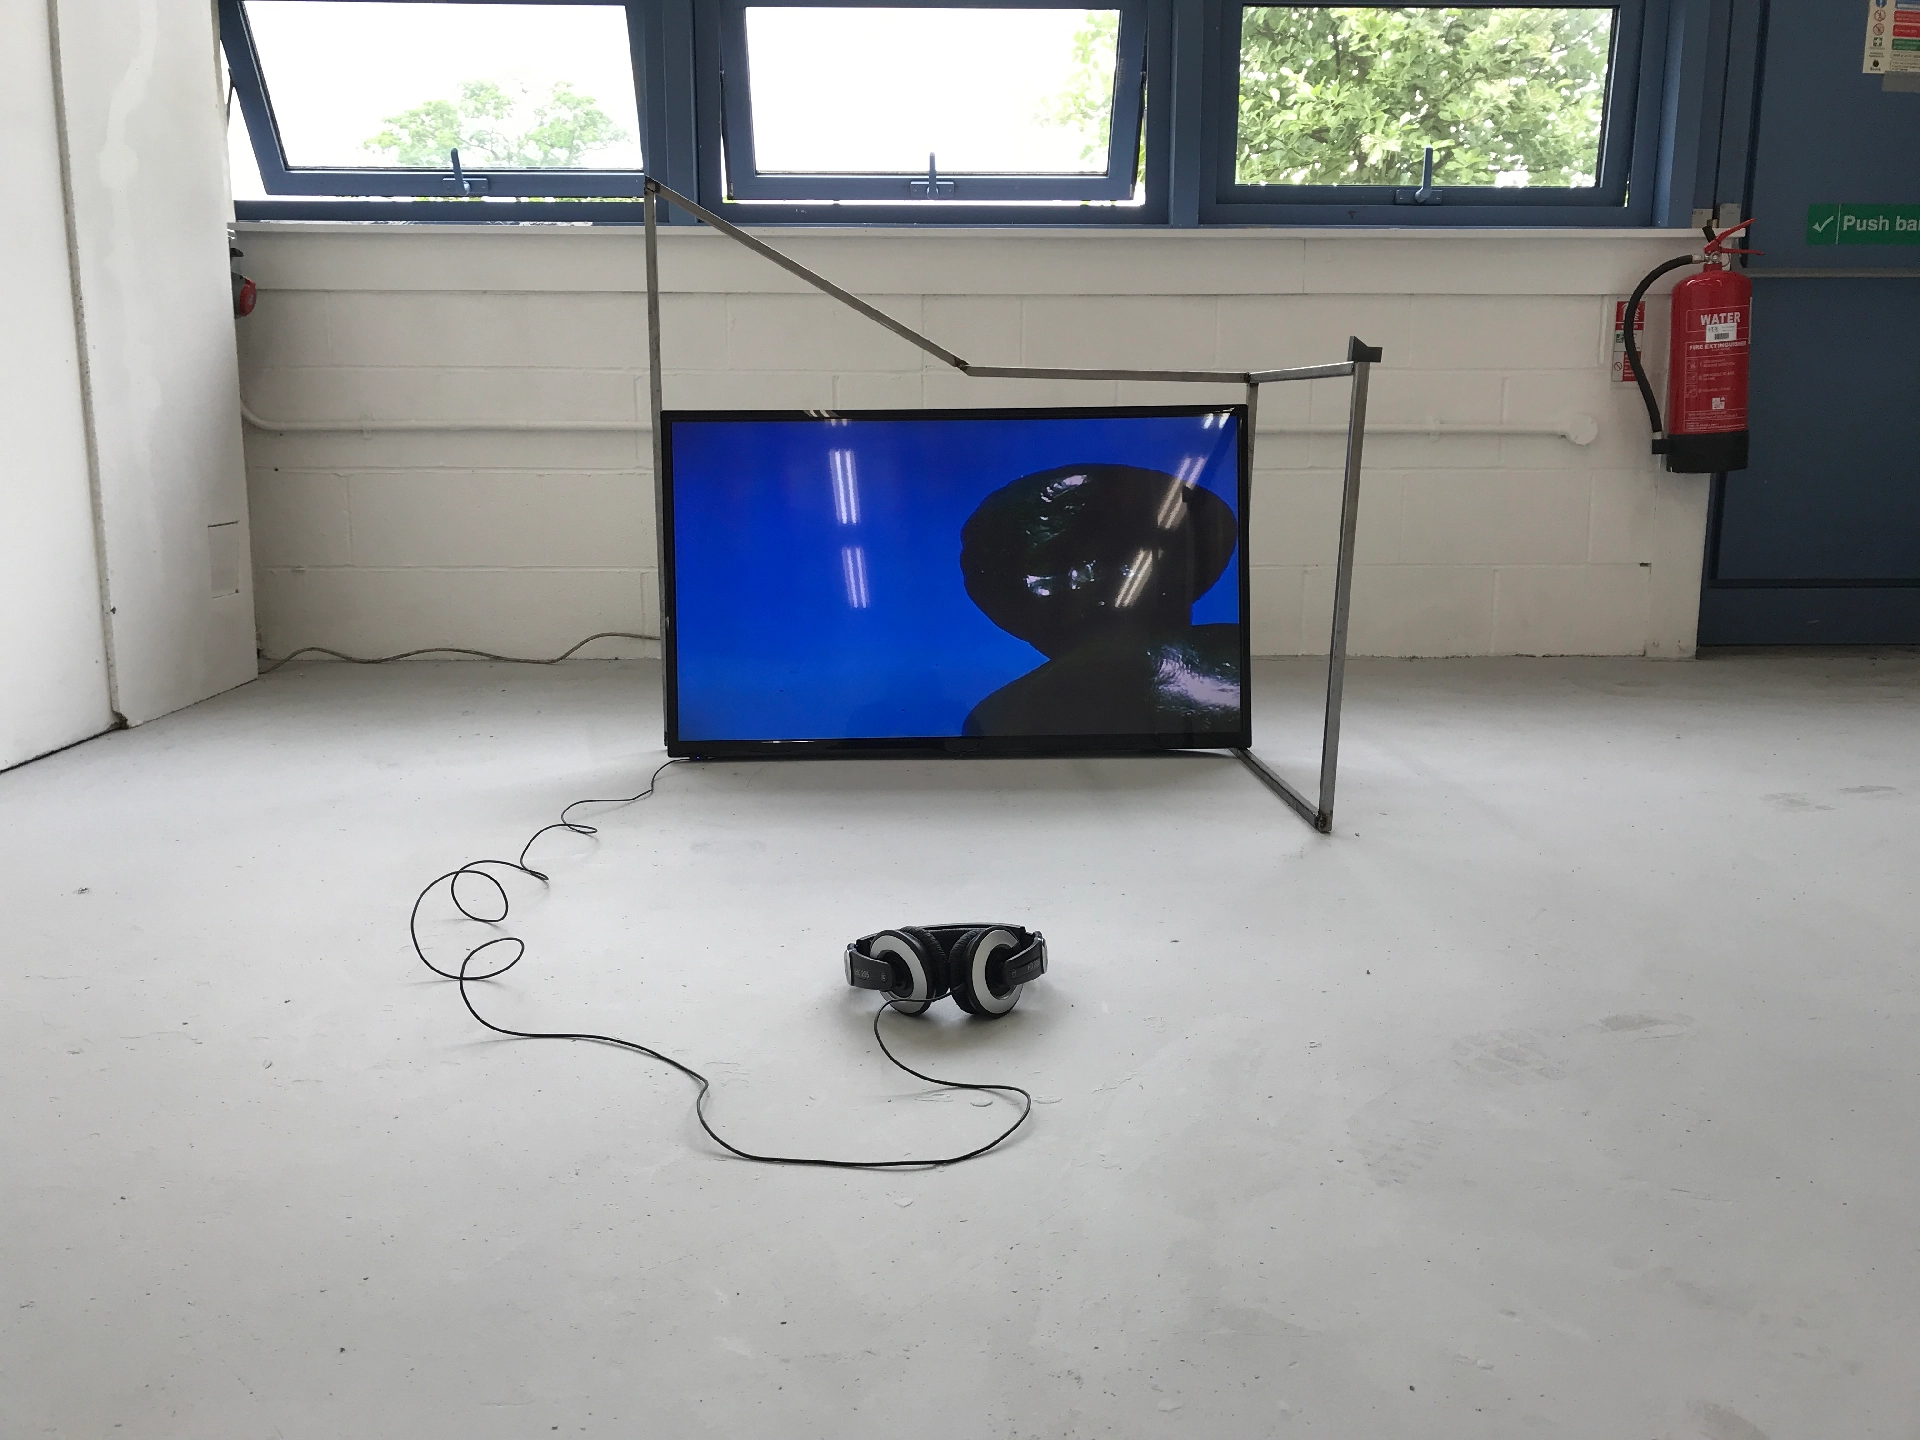 Single channel video. Duration: 06 minutes, 15 seconds. 25mm steel square-tube, TV, 3D printed SLS plastic, headphones